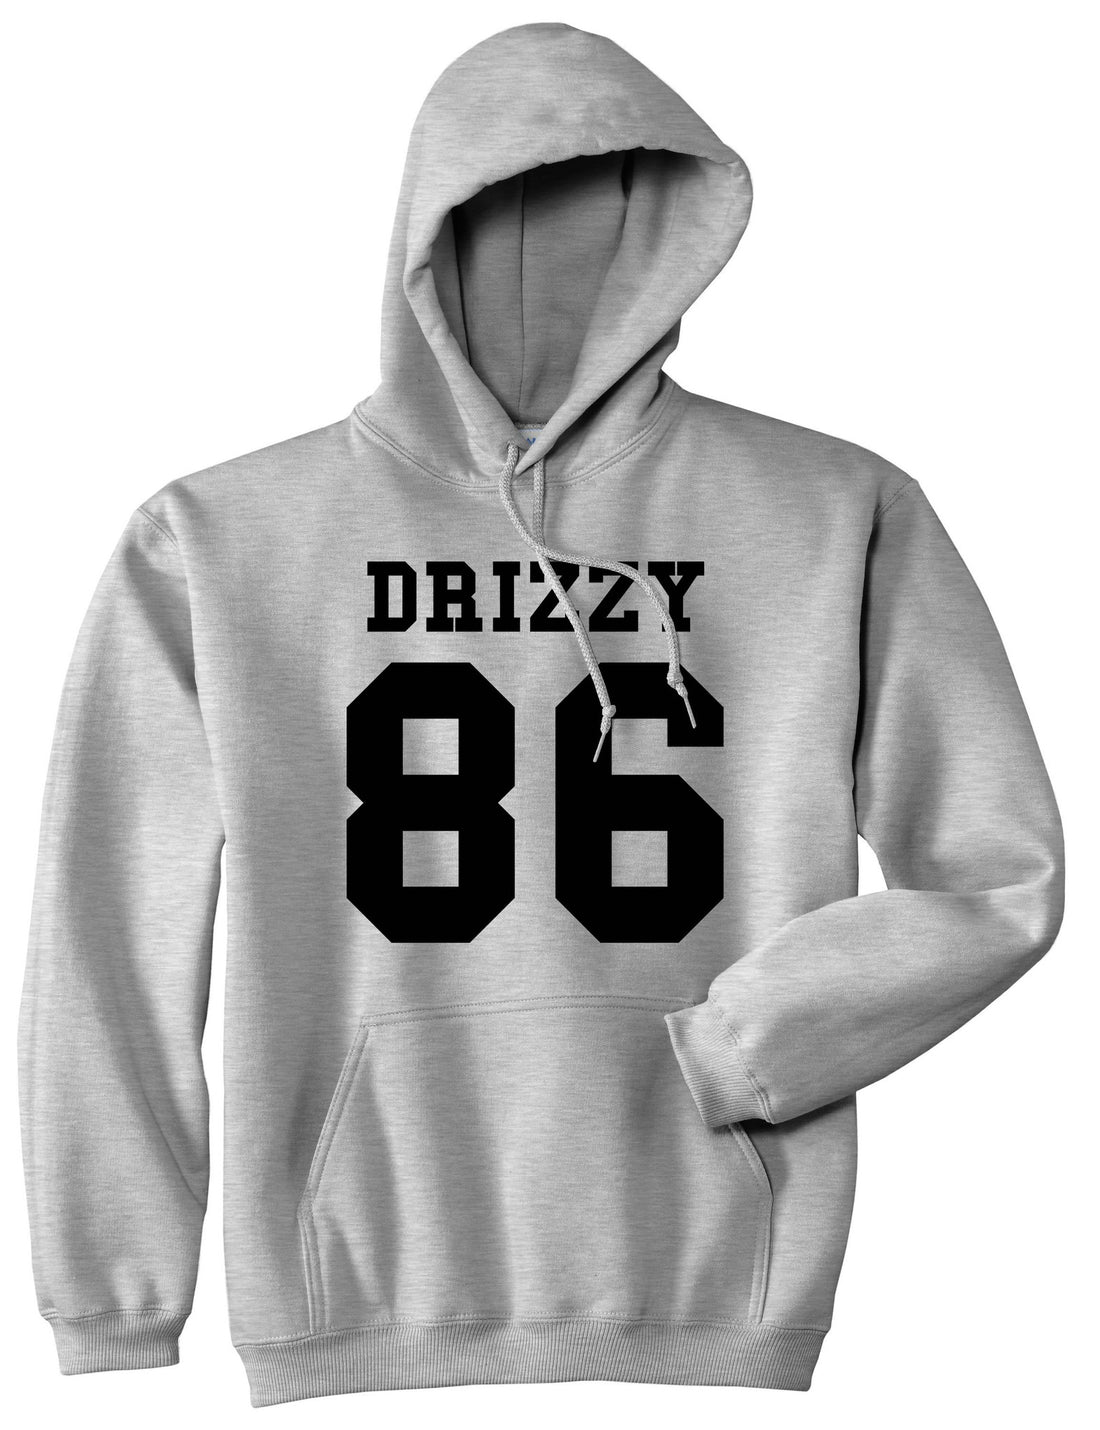 Drizzy 86 Team Jersey Pullover Hoodie Hoody in Grey by Kings Of NY